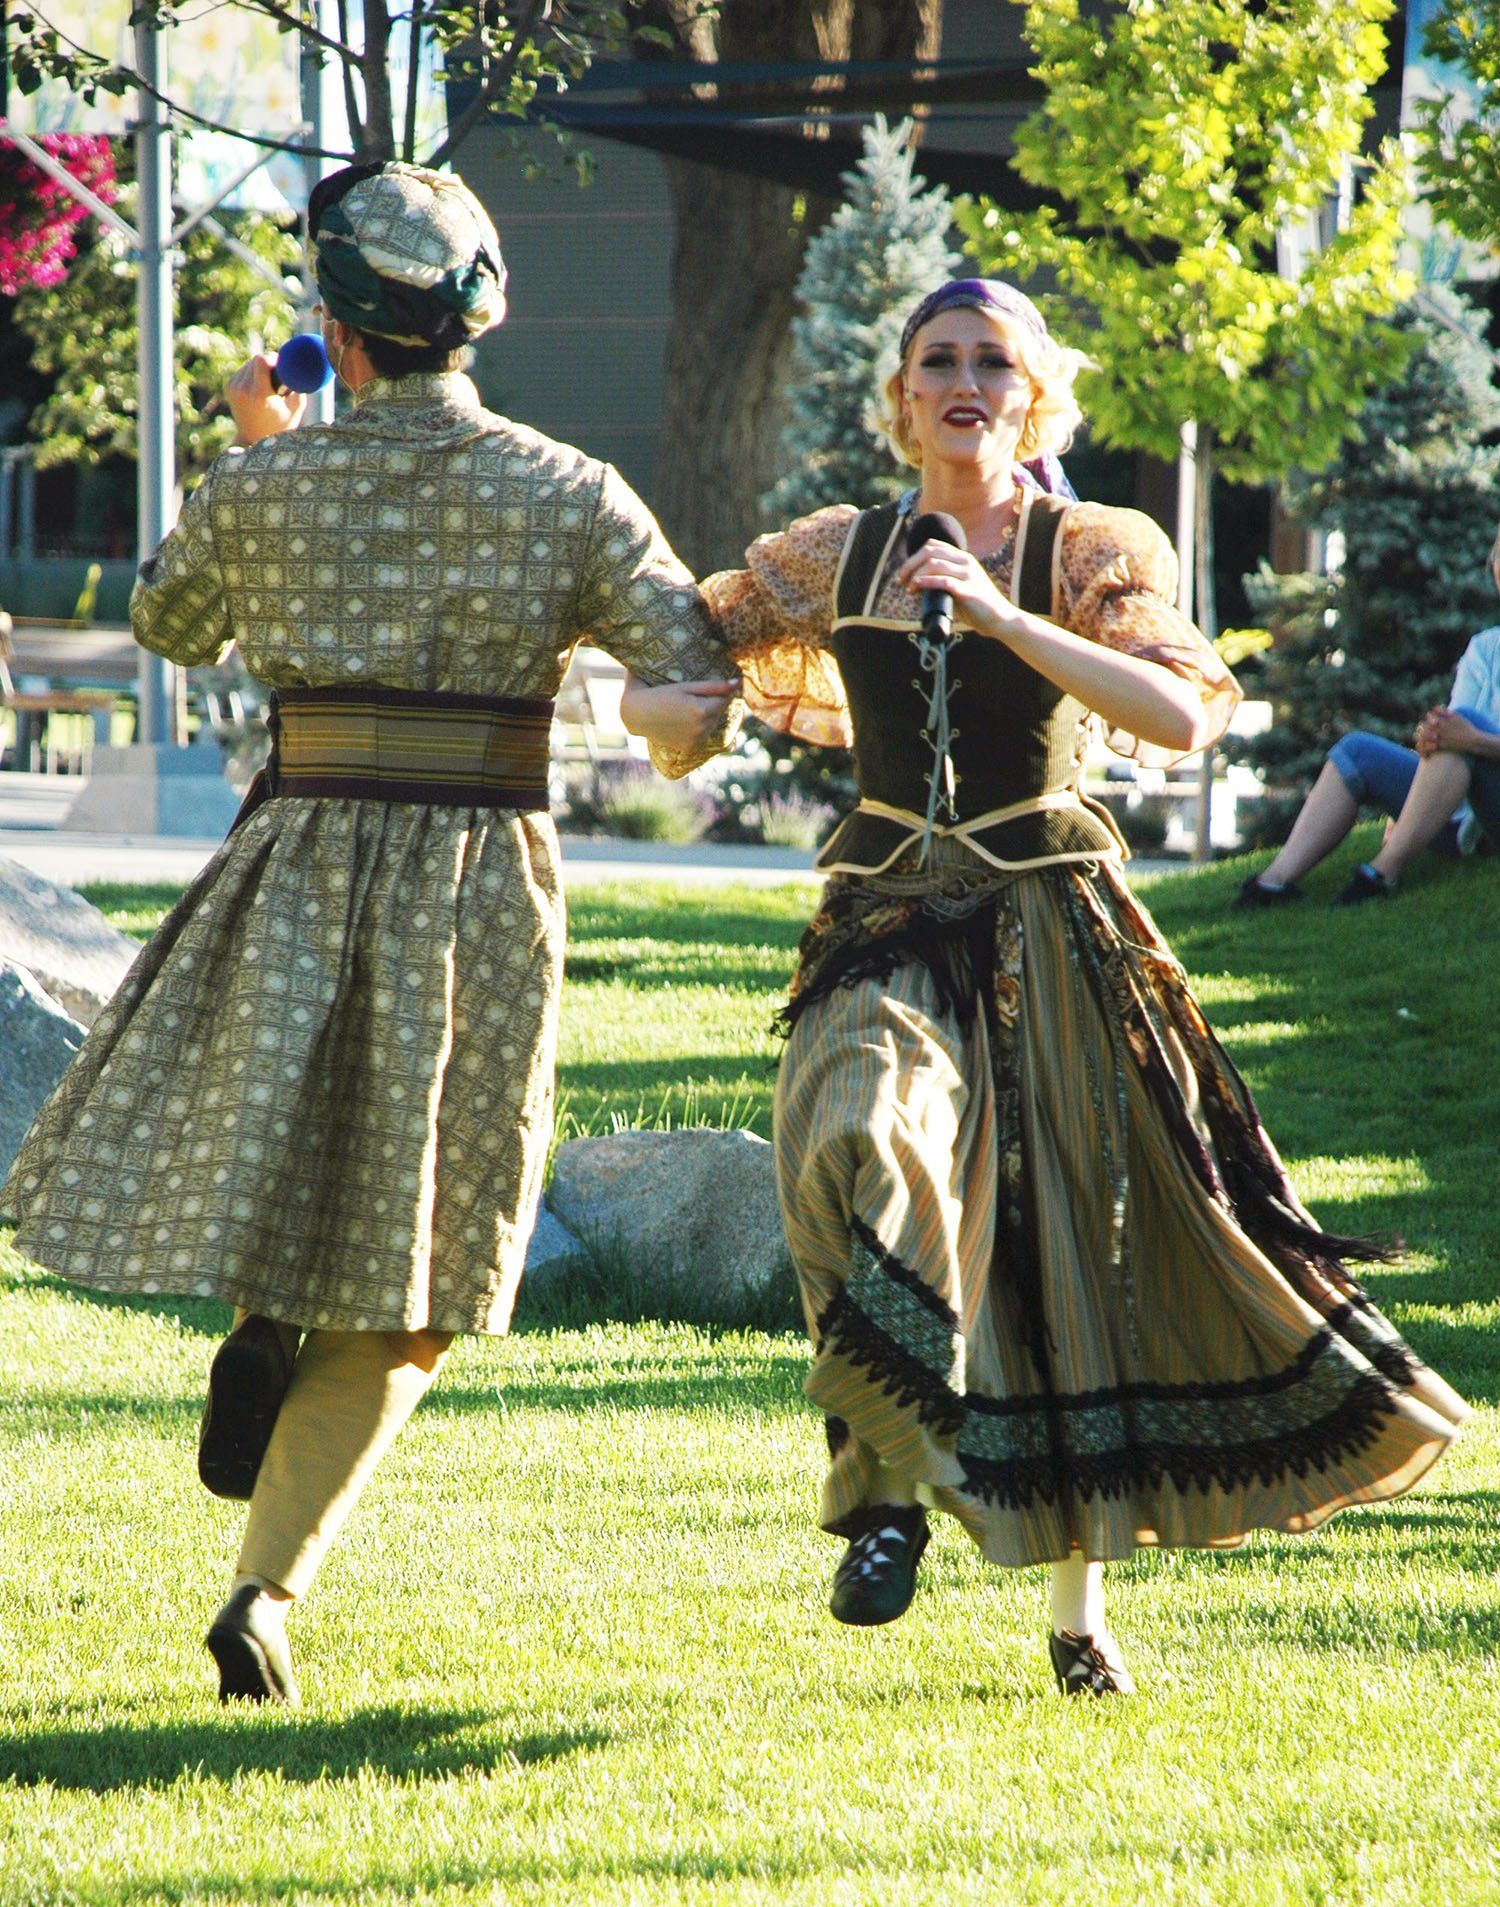 Actors dancing on a lawn during a play rehearsal